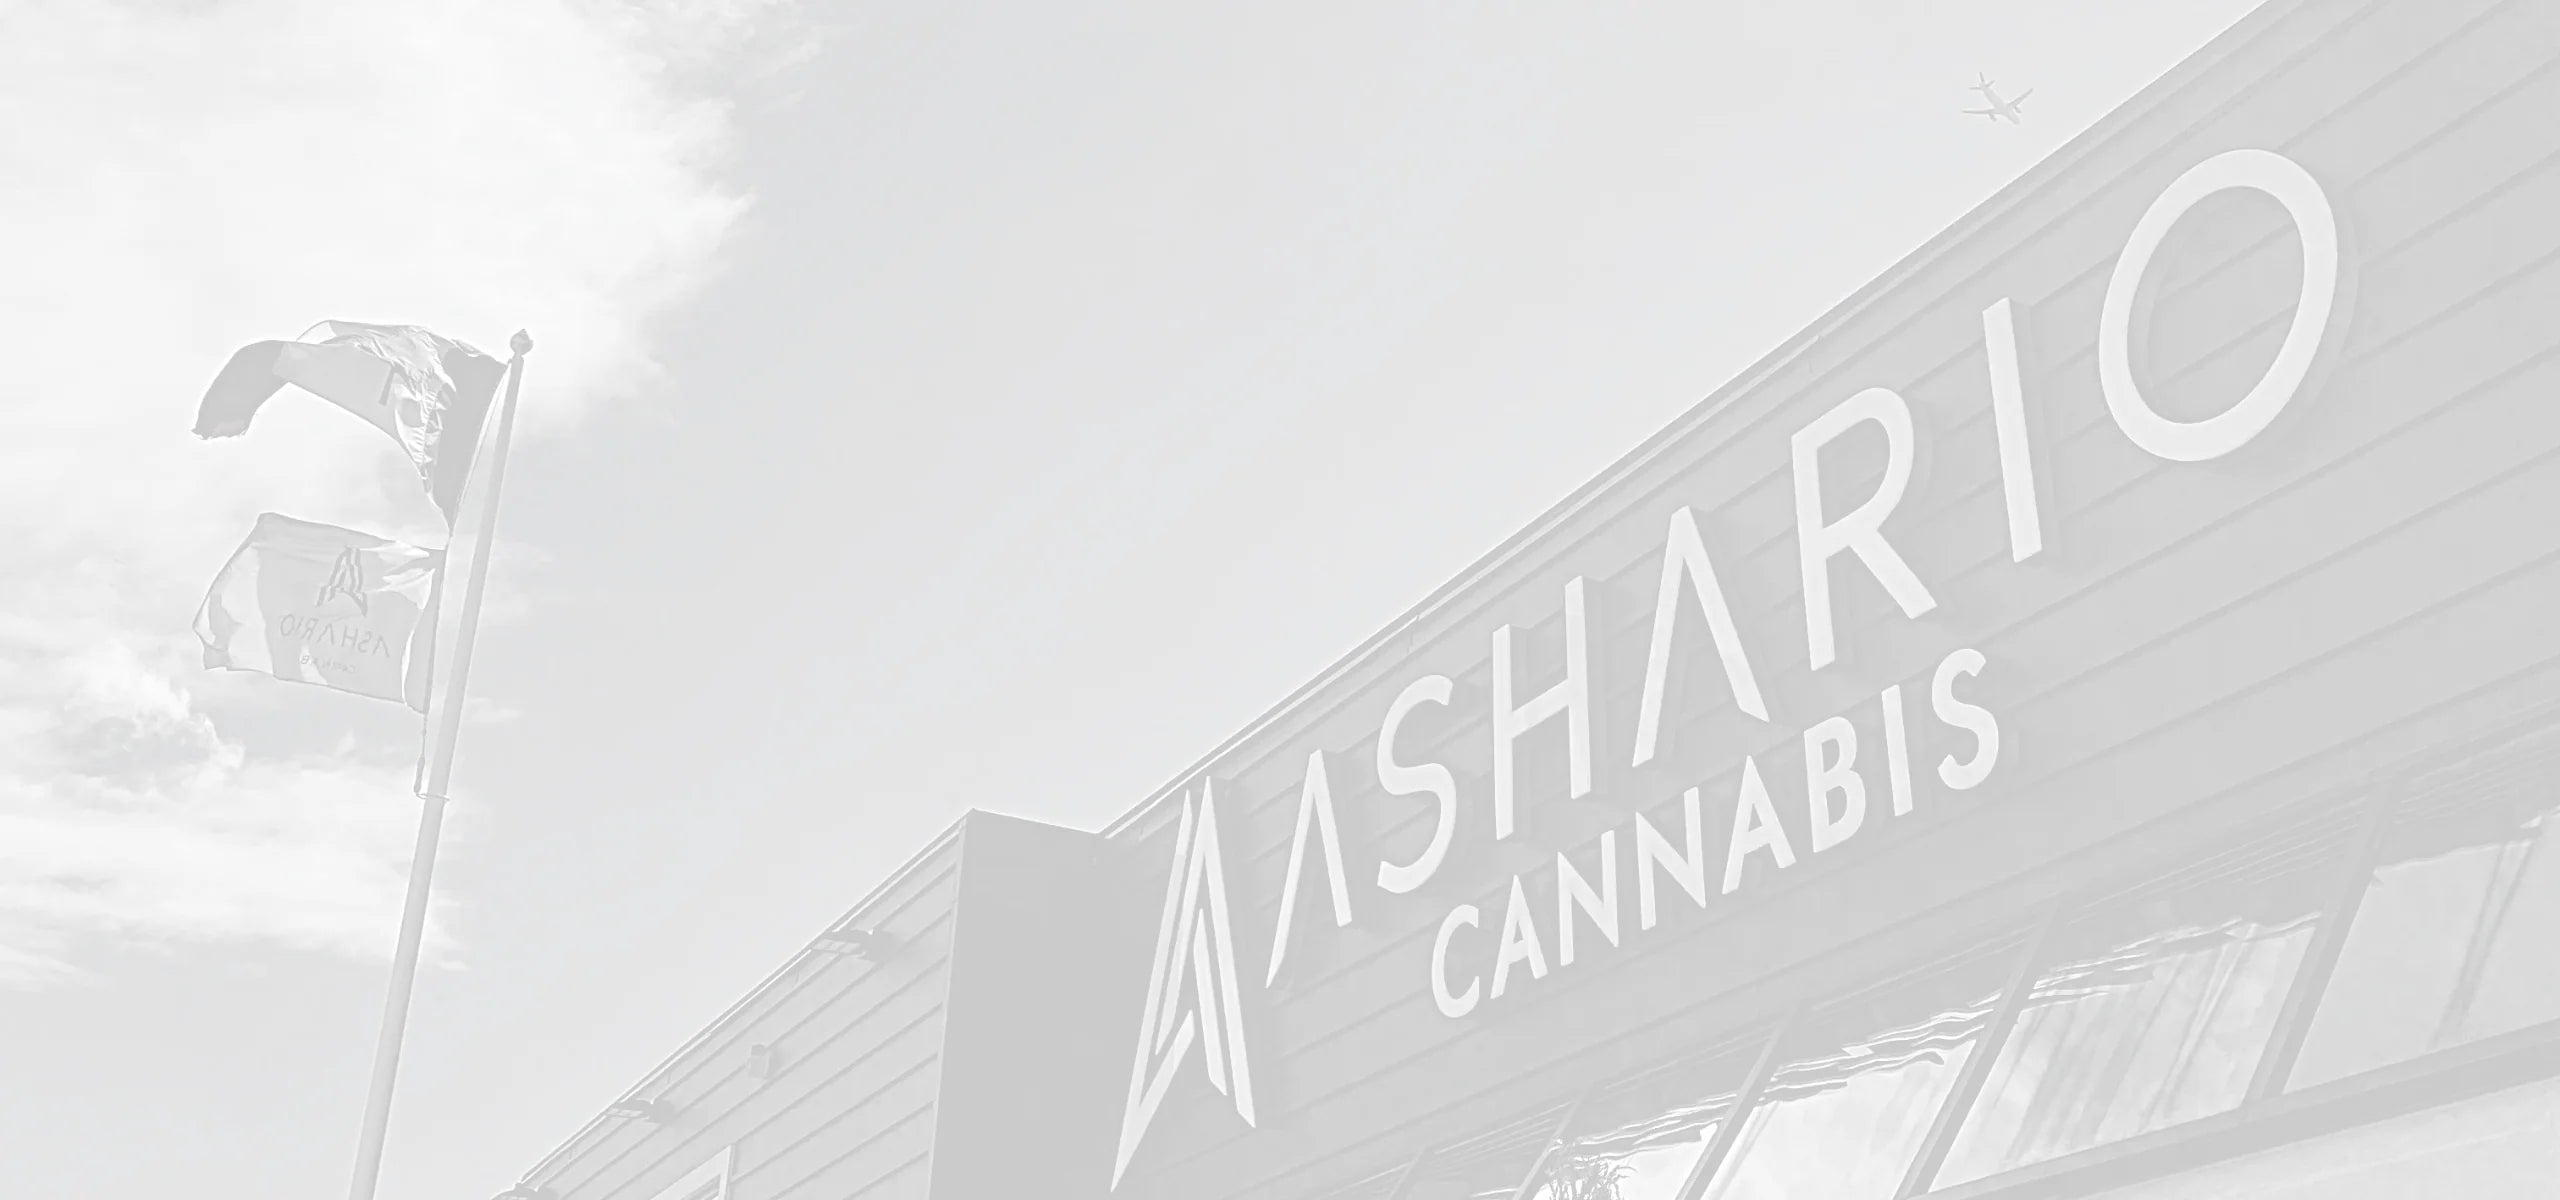 Why It's the Top Weed Shop in Canada